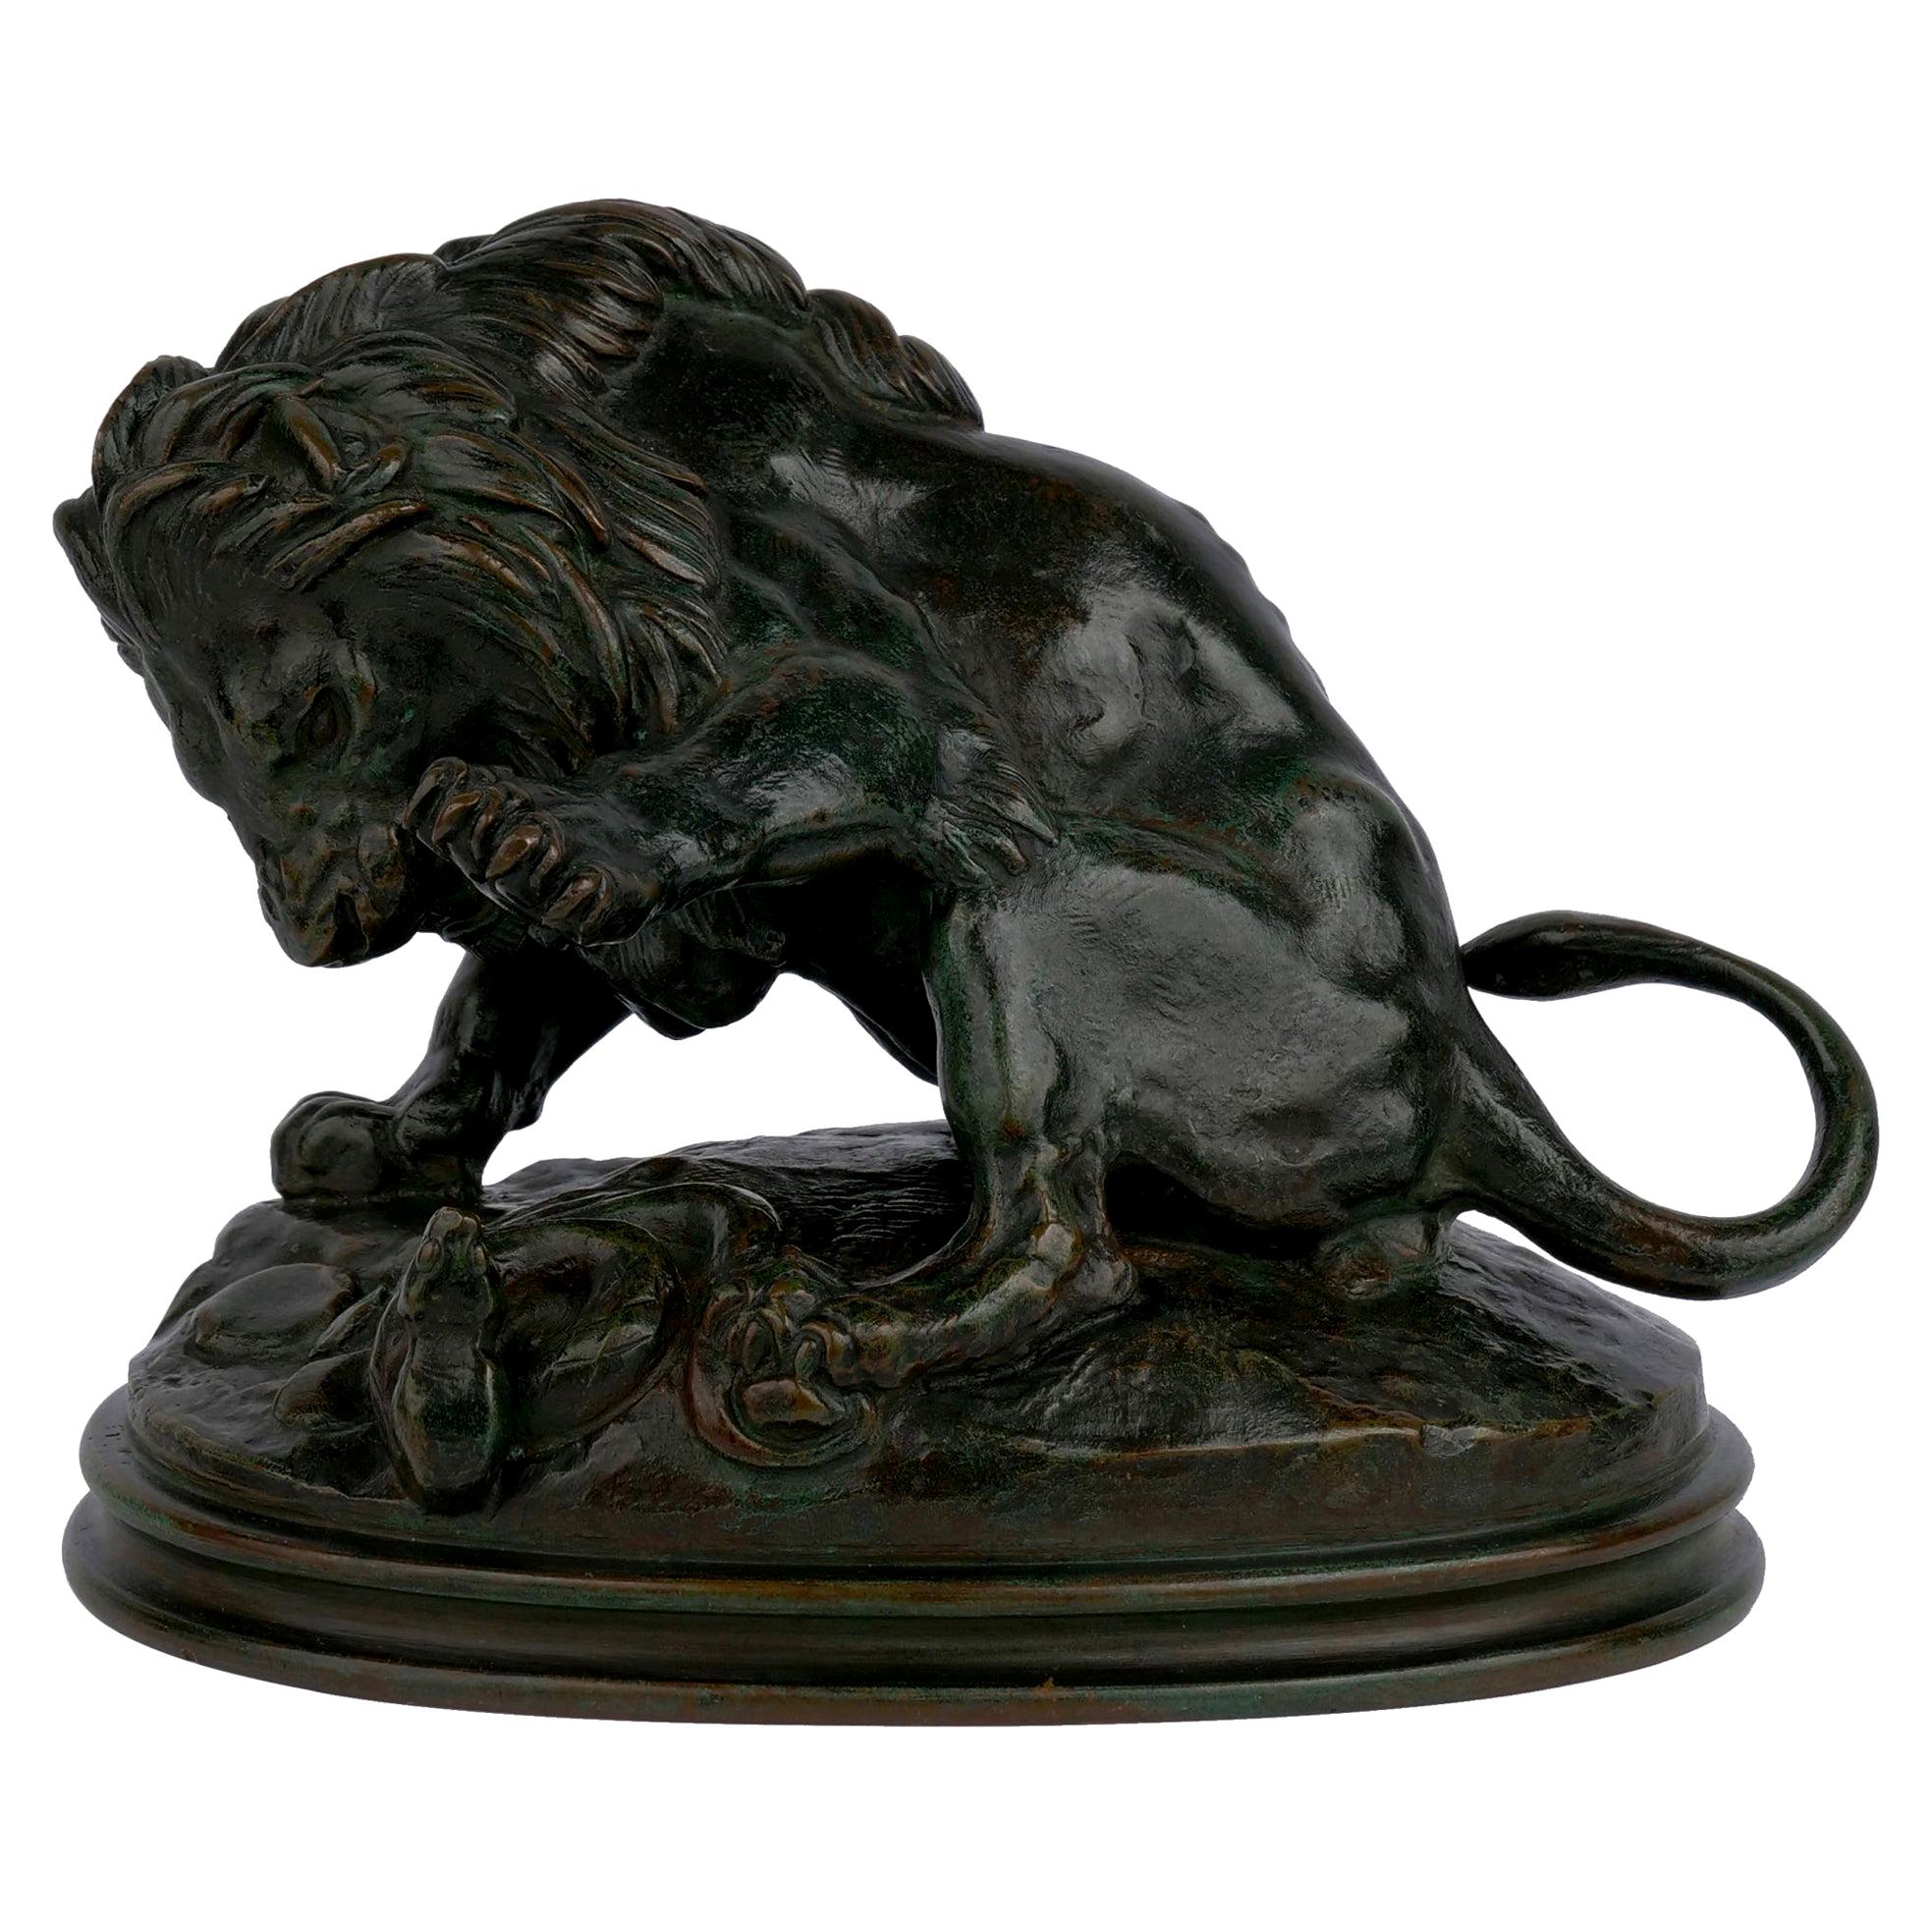 "Lion au Serpent No. 3” French Bronze Sculpture by Barye & Delafontaine